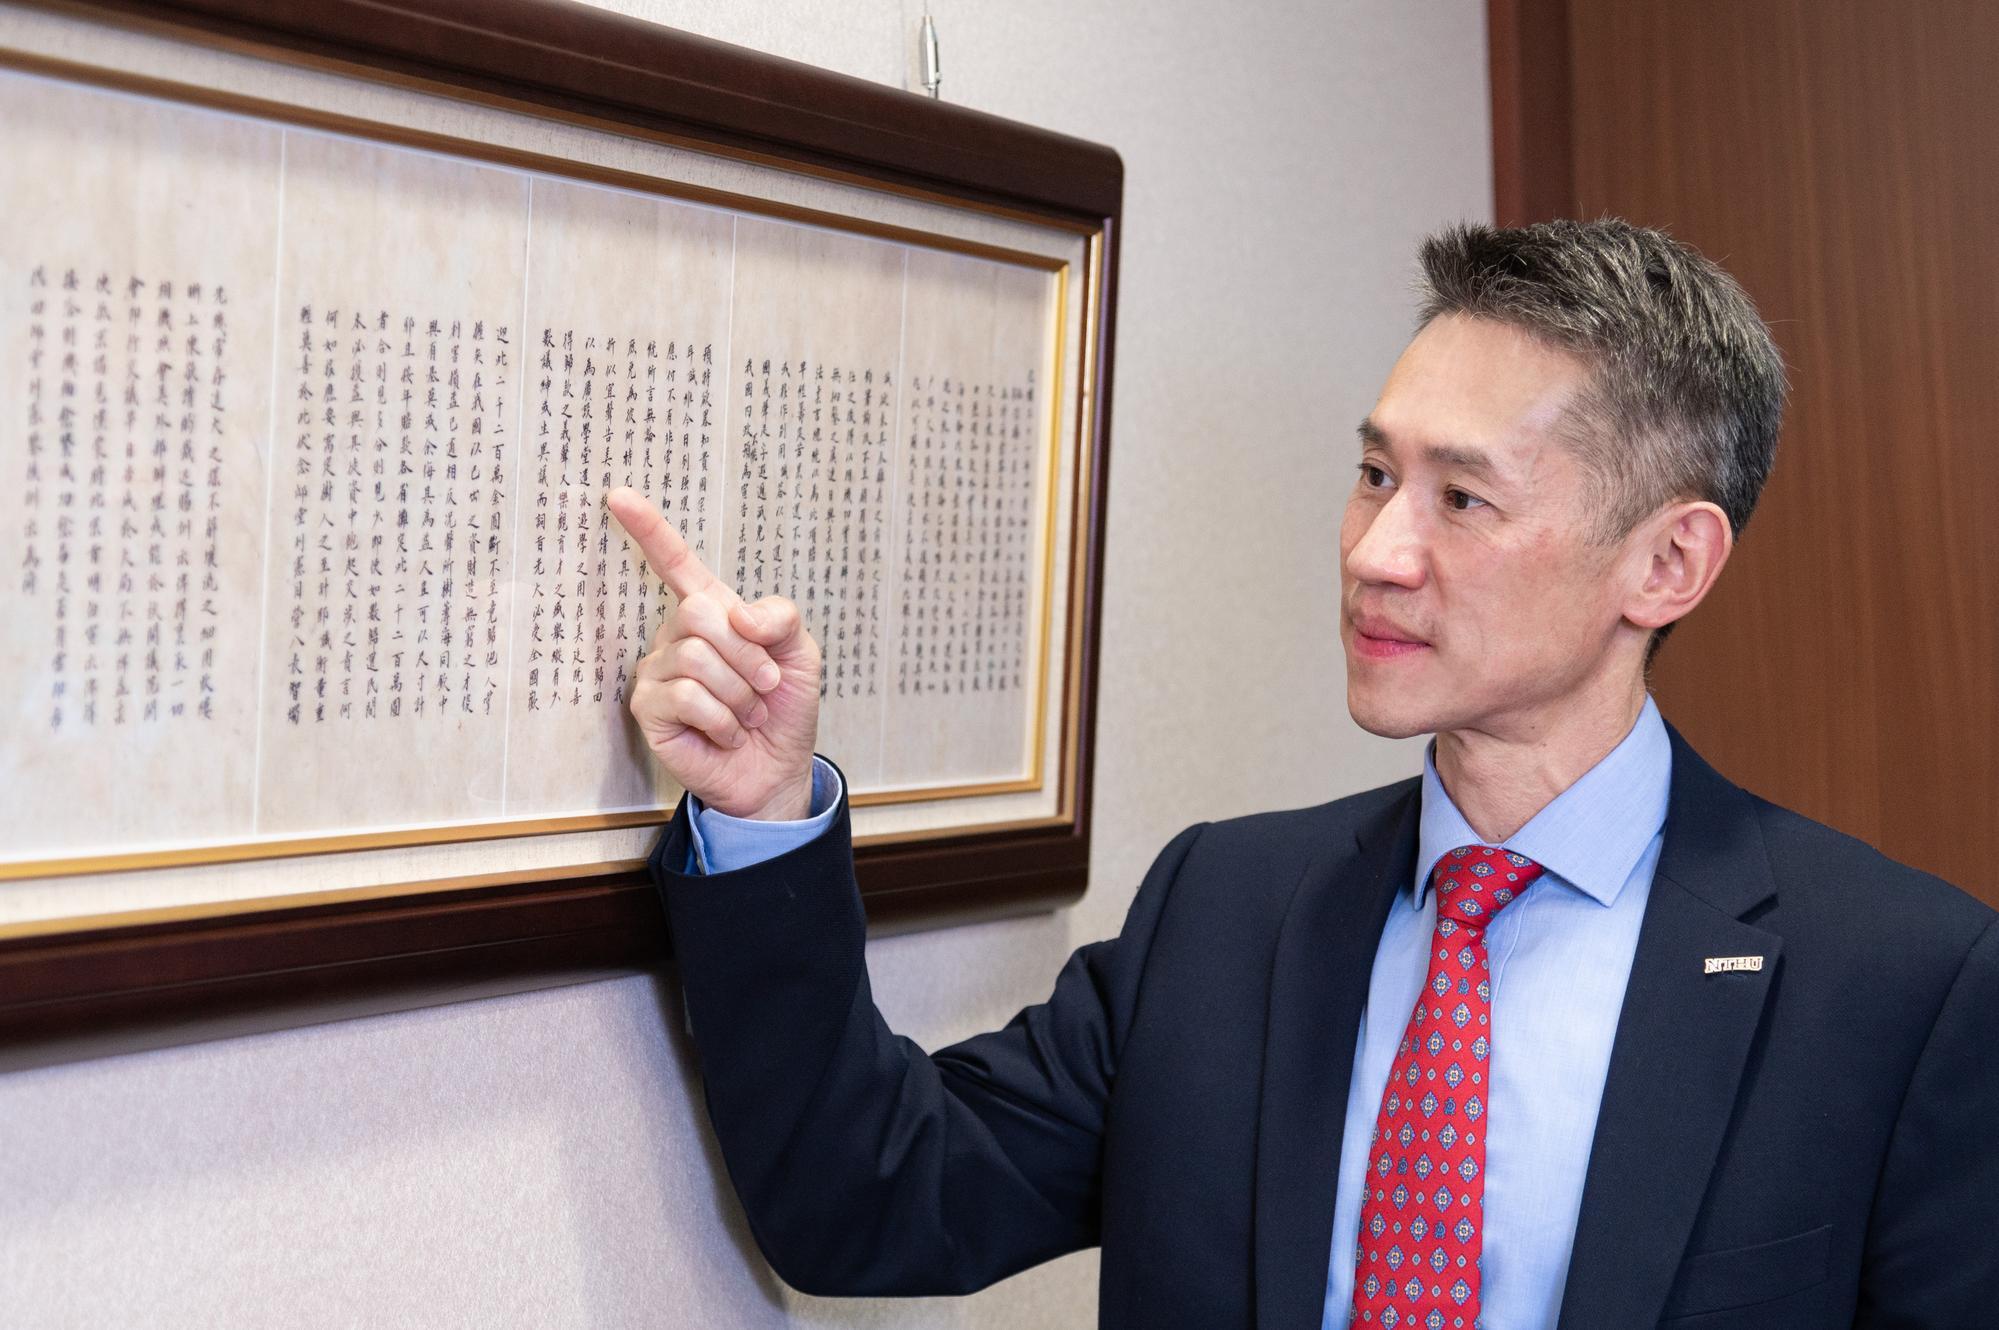 NTHU President W. John Kao (高為元) pointing out some of the details in these important historical documents.